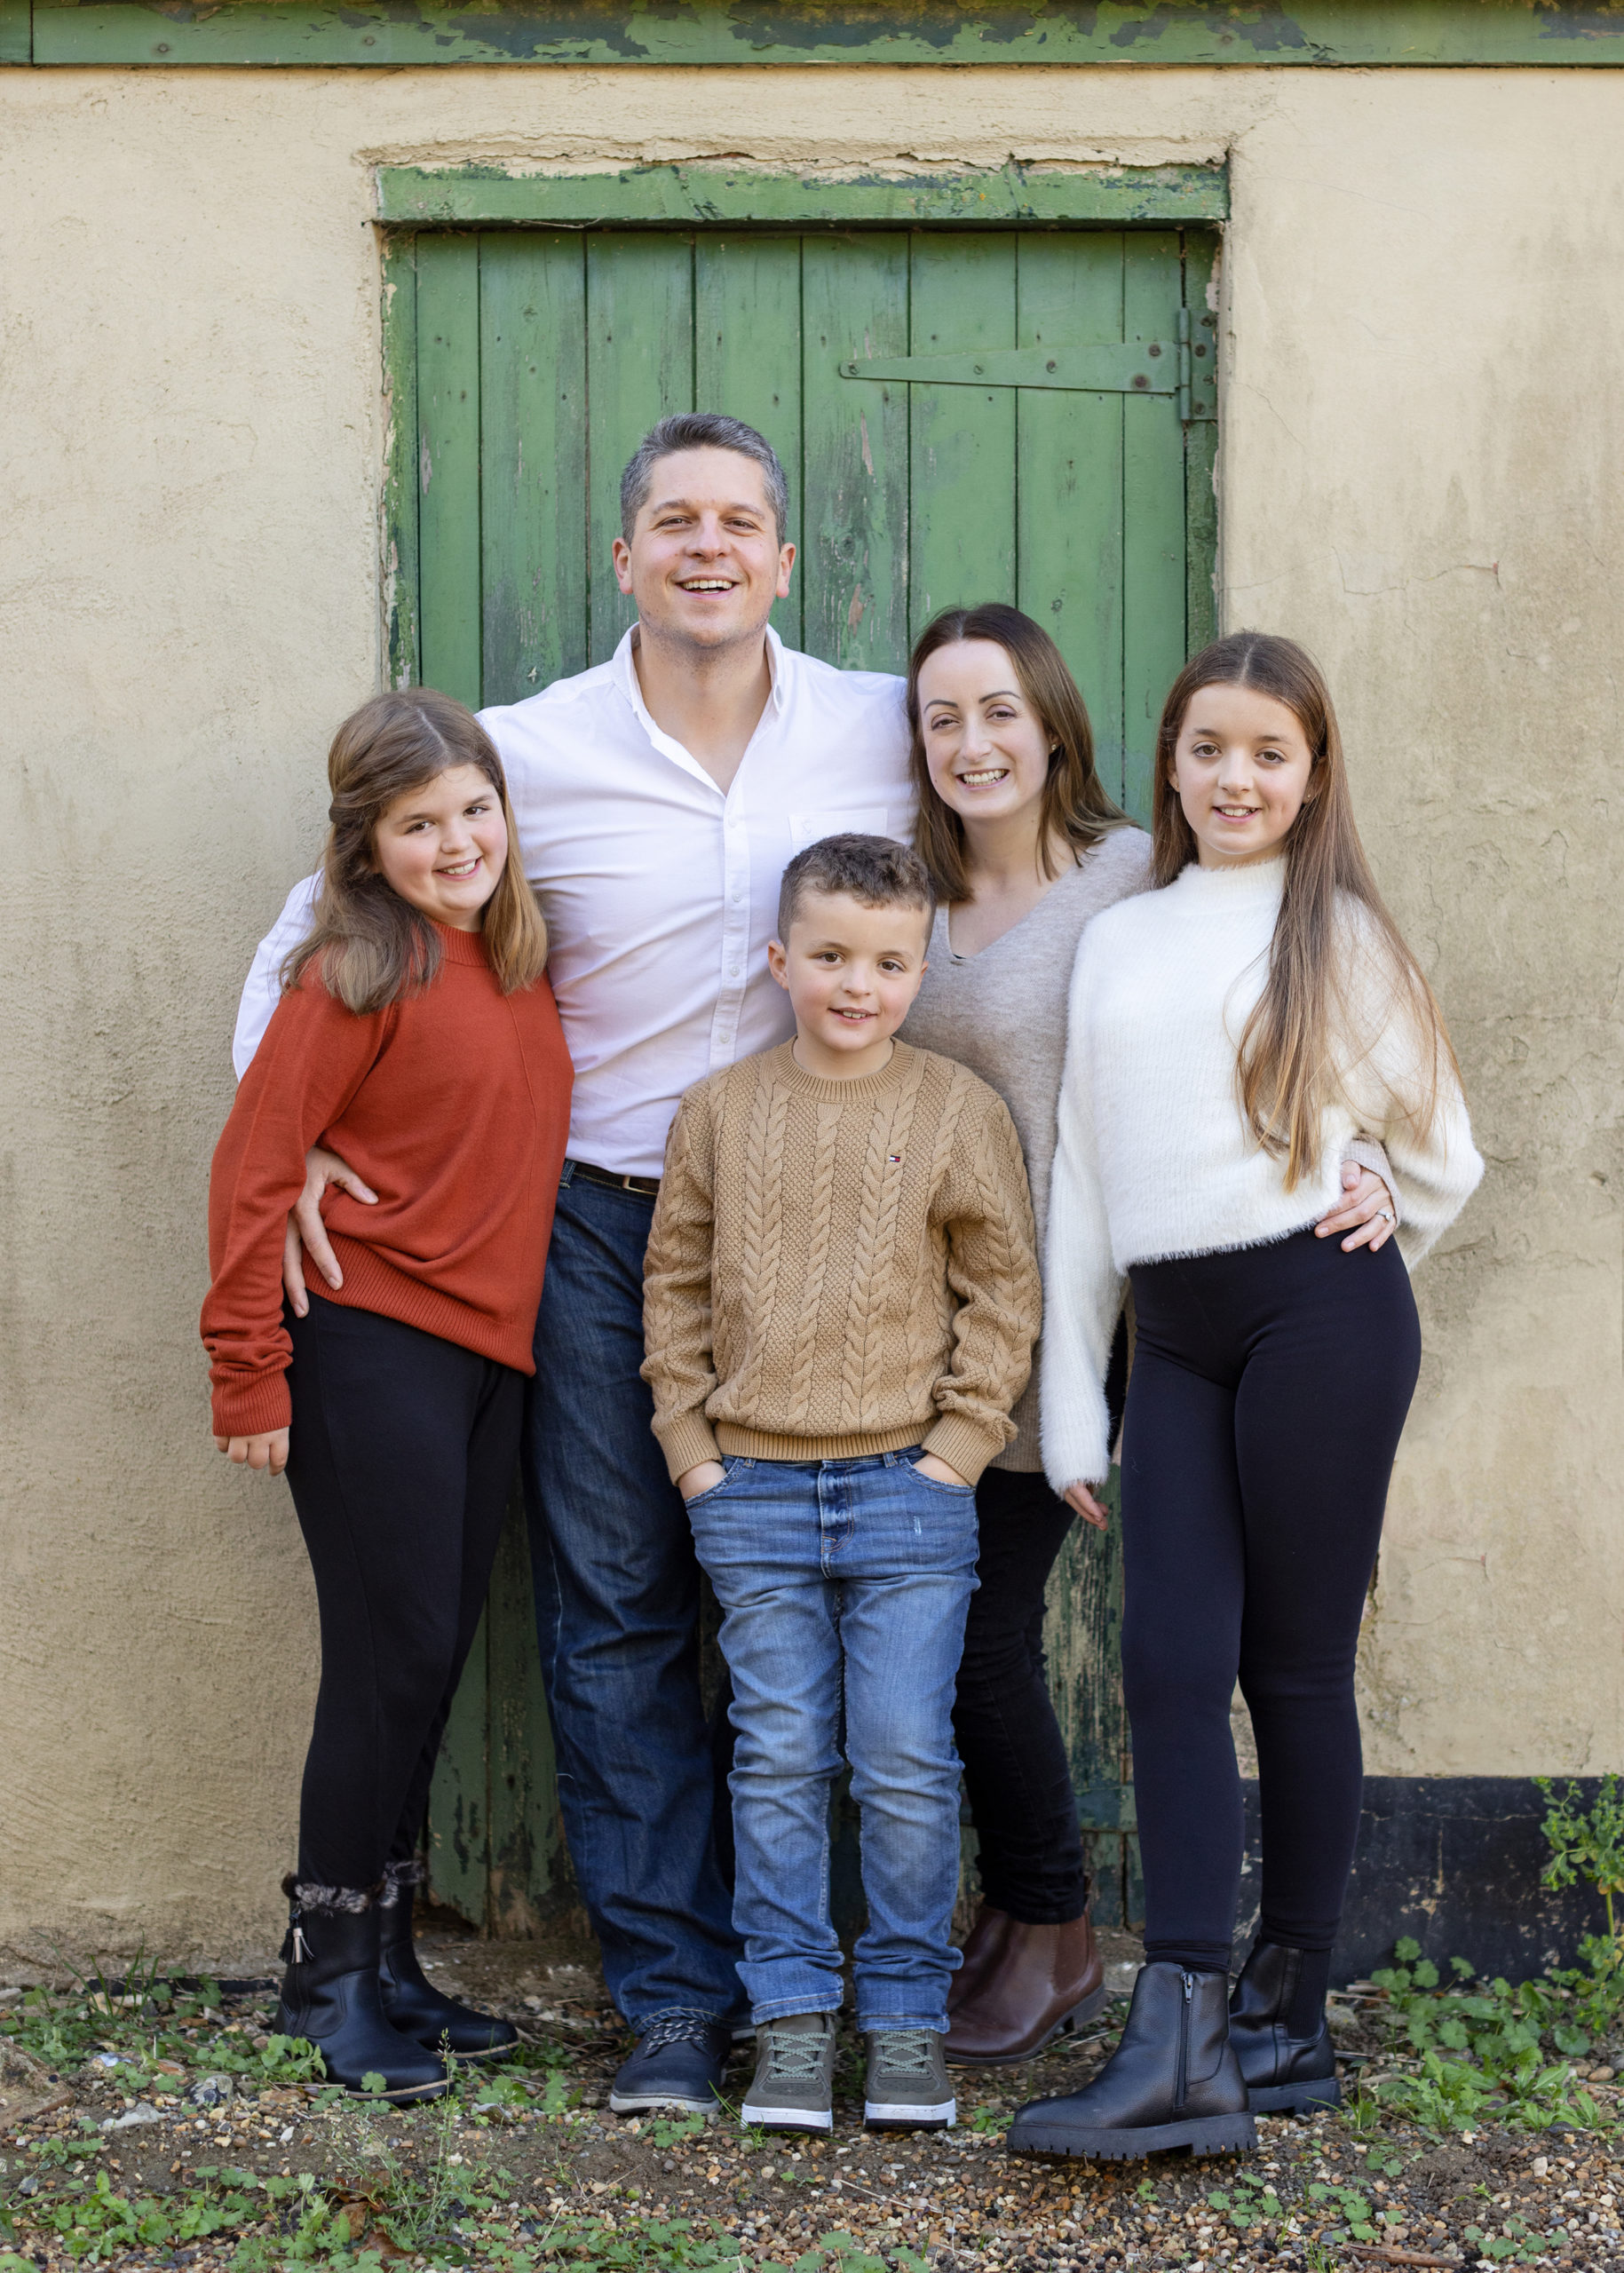 Family of 5 pose for a photo during family photoshoot on suffolk farm